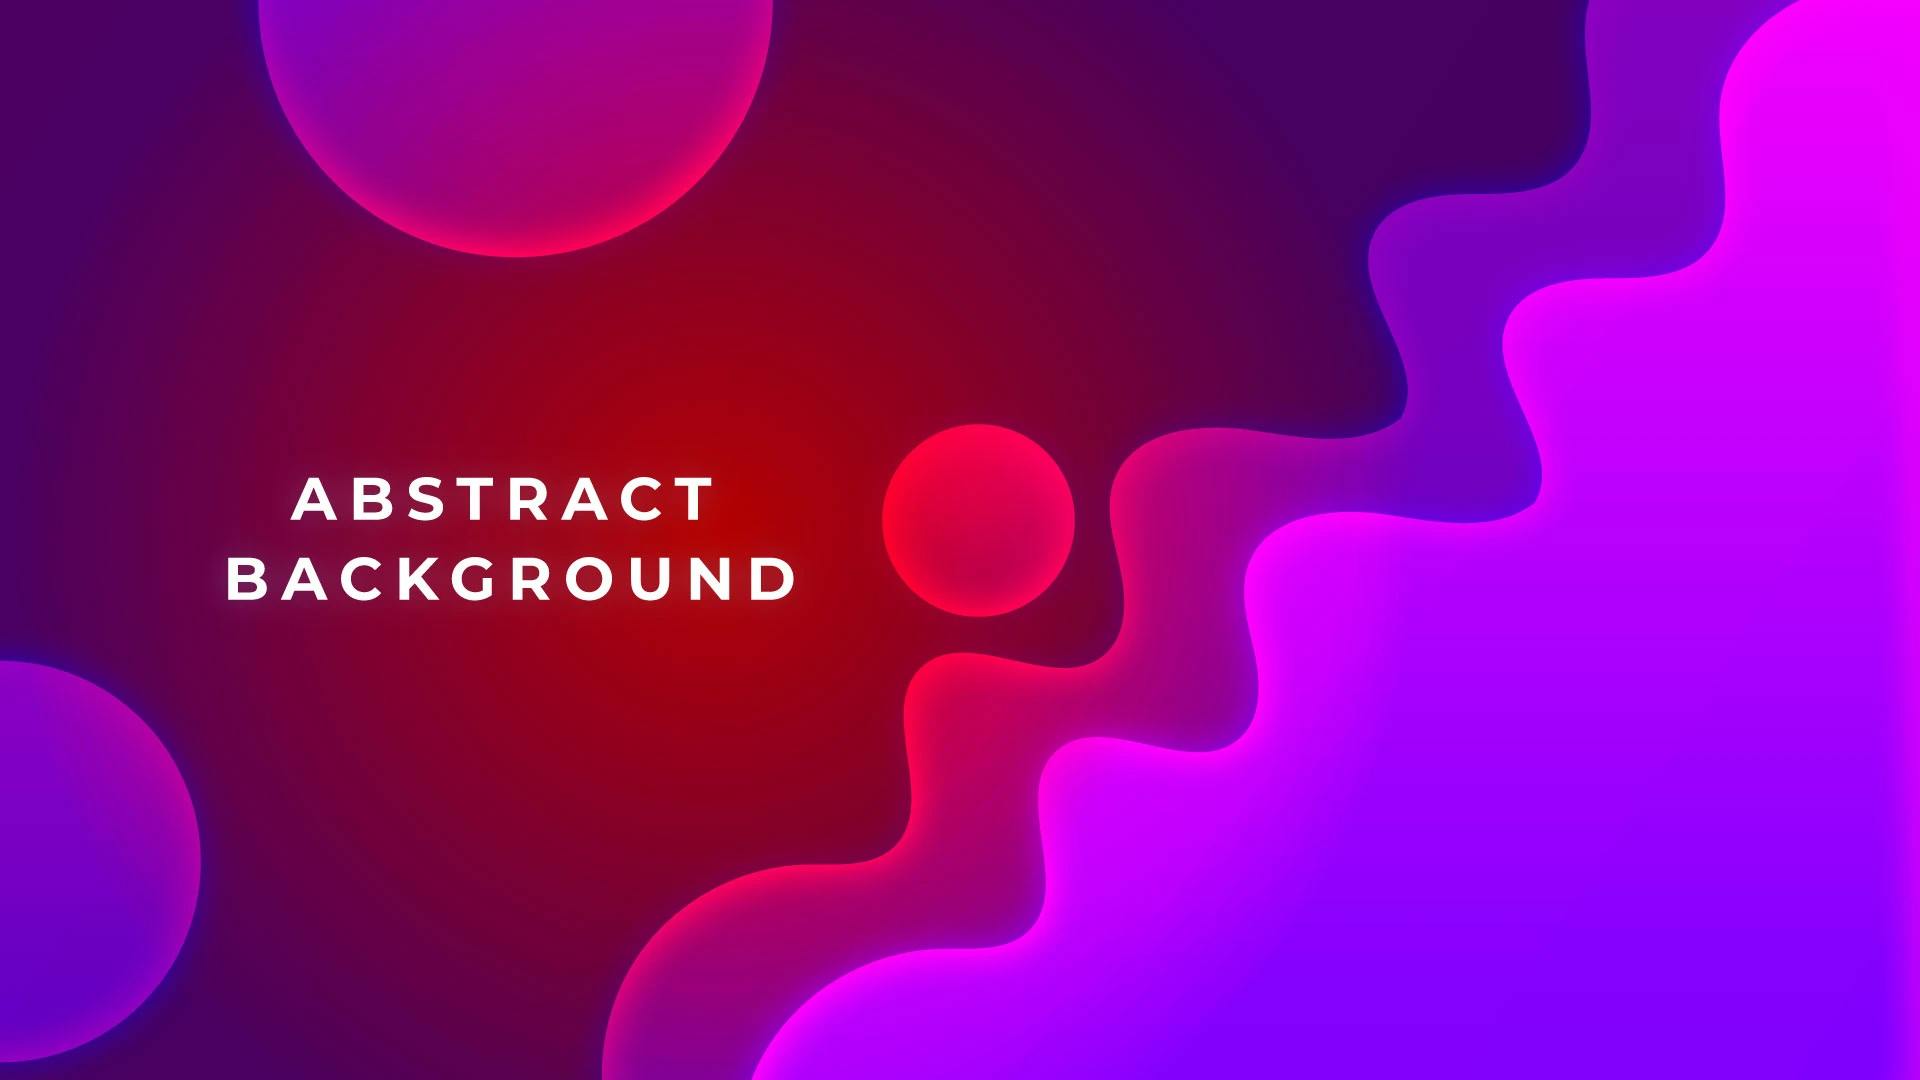 Inspire Creativity with Gradient Background Template